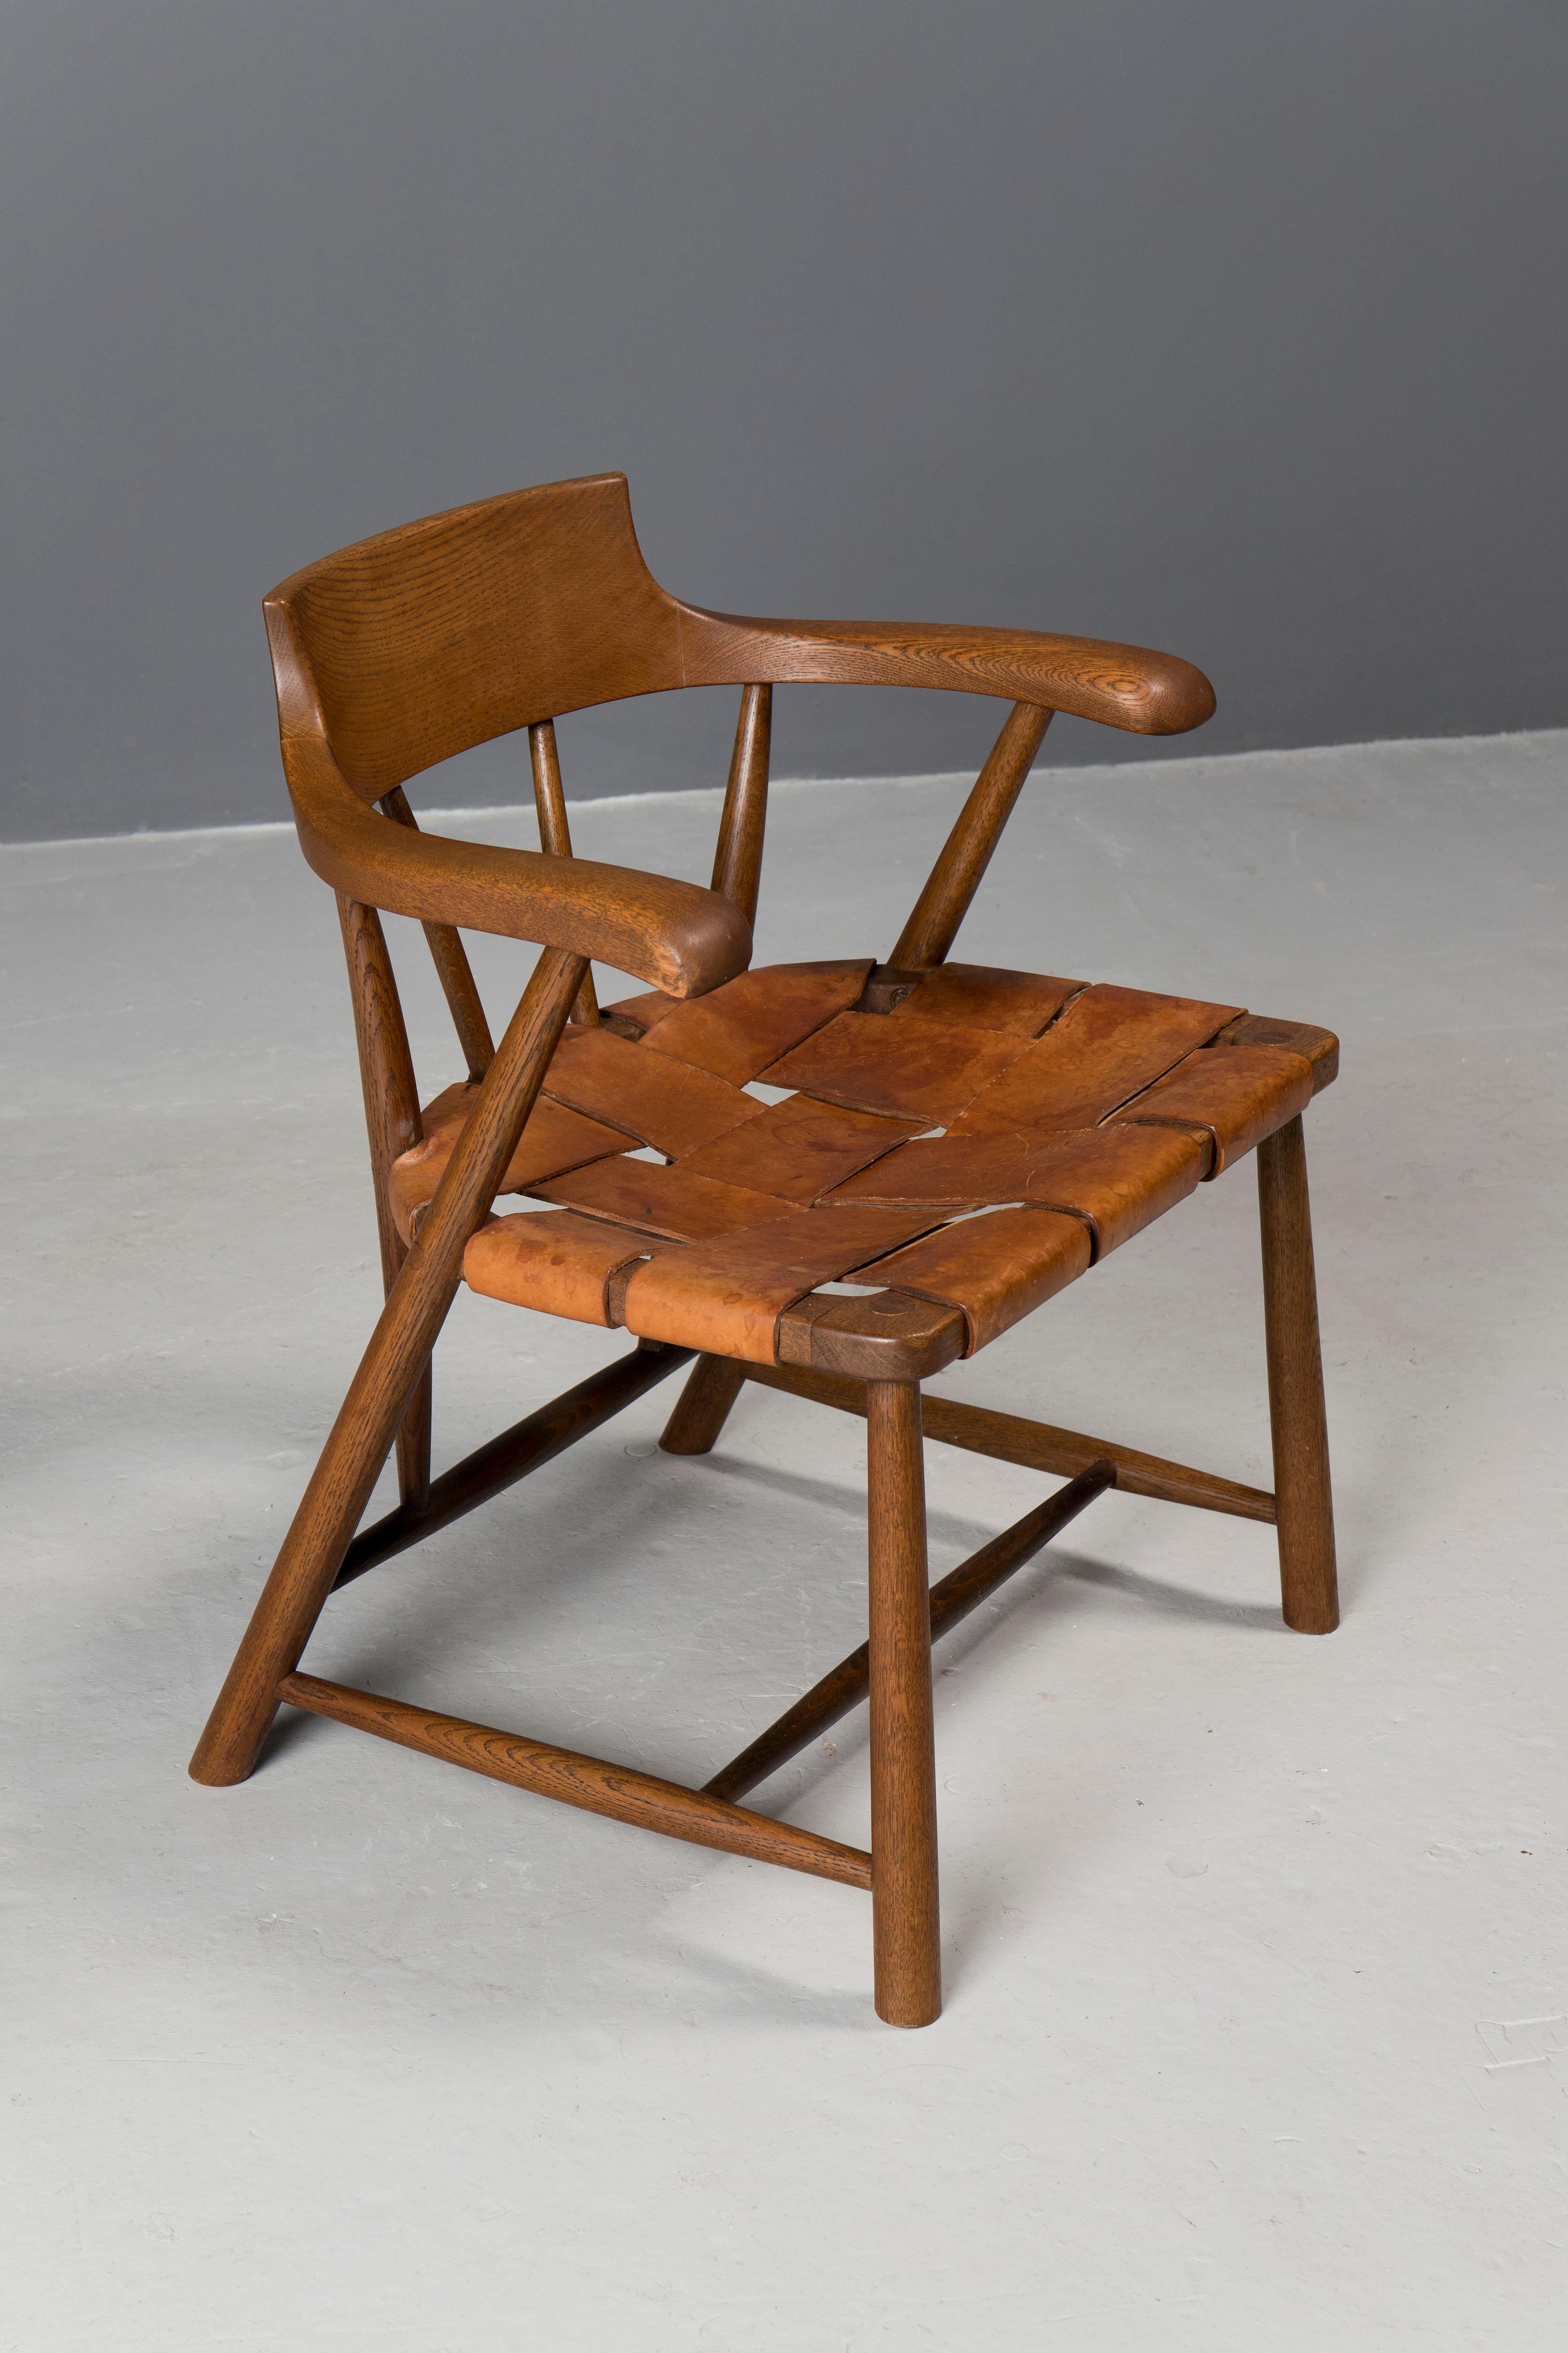 Important custom commission Captain's chair, created by studio artist Wharton Esherick in the 1960s.
Frame is hand carved in oak and seat is in beautiful woven cognac color saddler leather.
Exquisite form, scale and comfort.
Frame has been